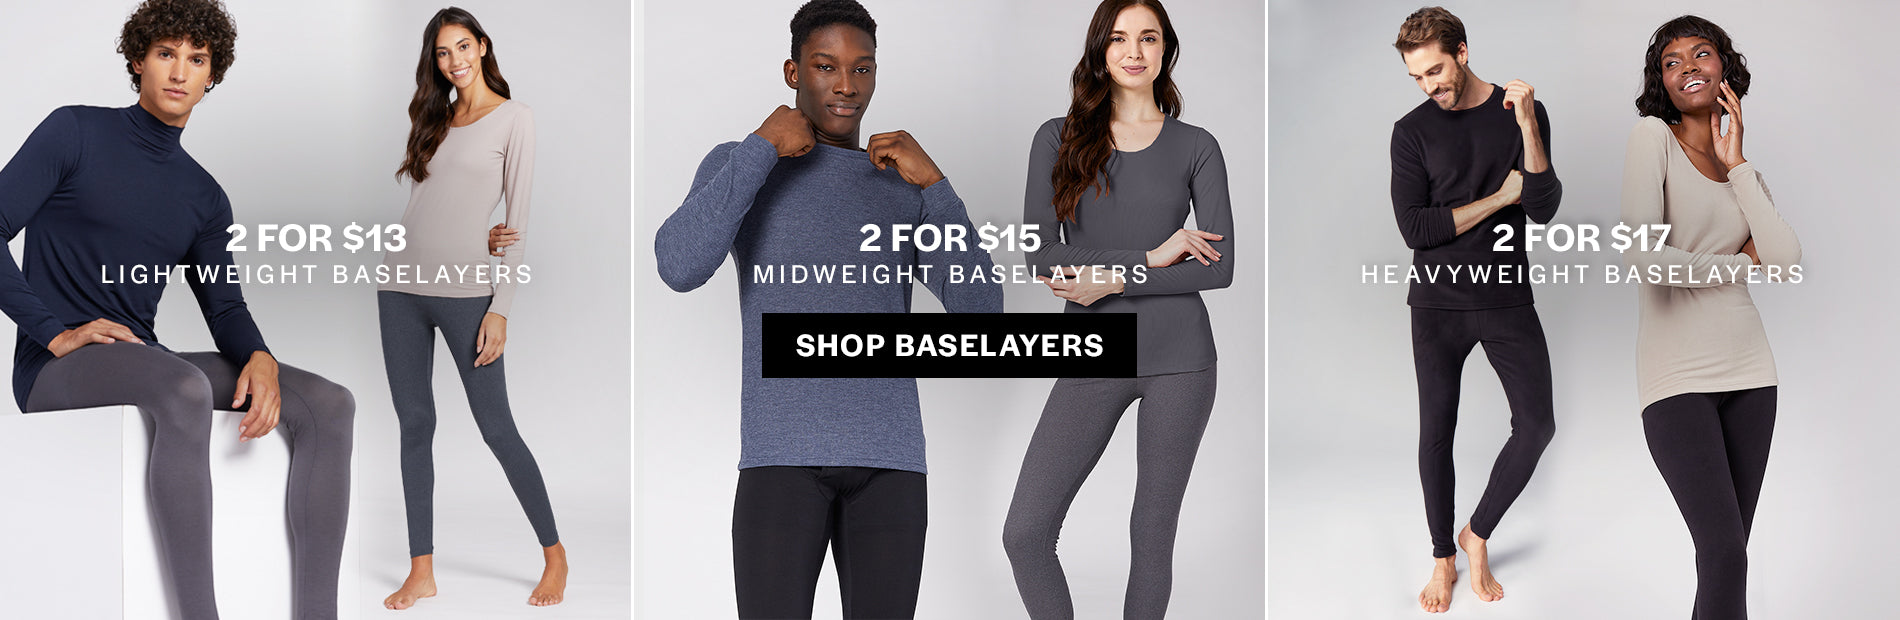 32 Degrees: 2 Baselayer Tops or Bottoms $13.00